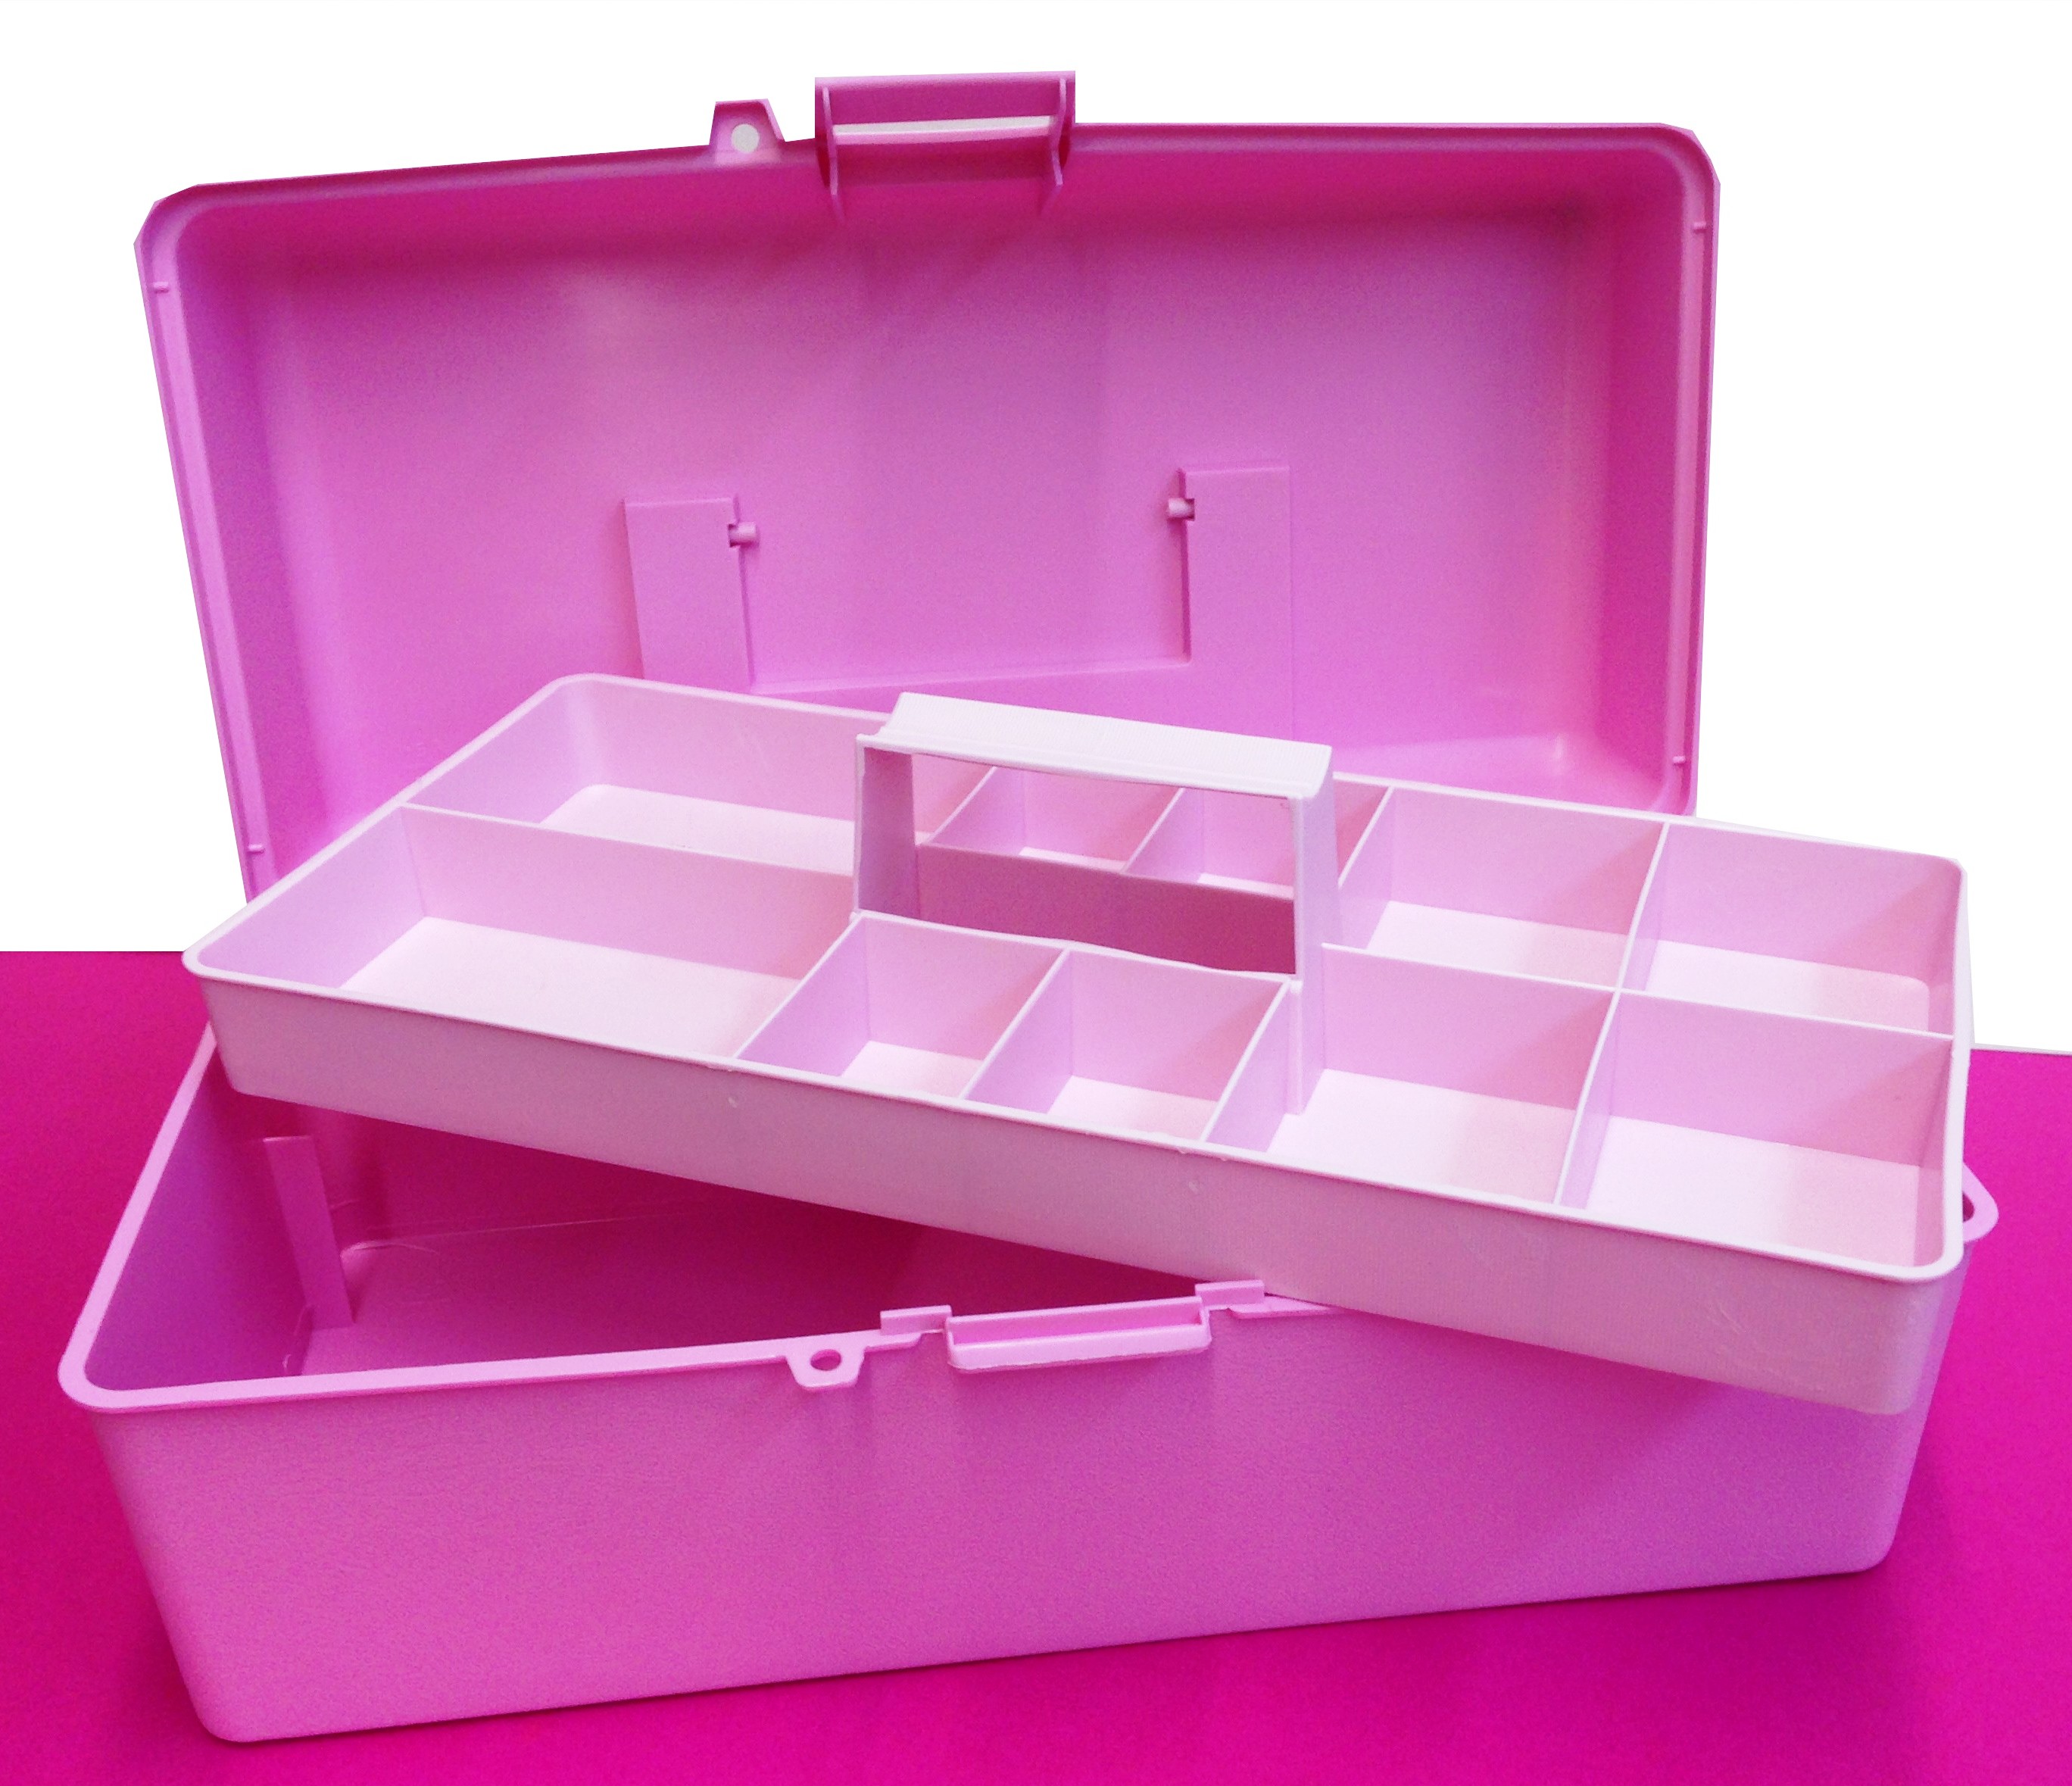 Quefe Plastic Storage Box with Pink Removable Tray, New Zealand